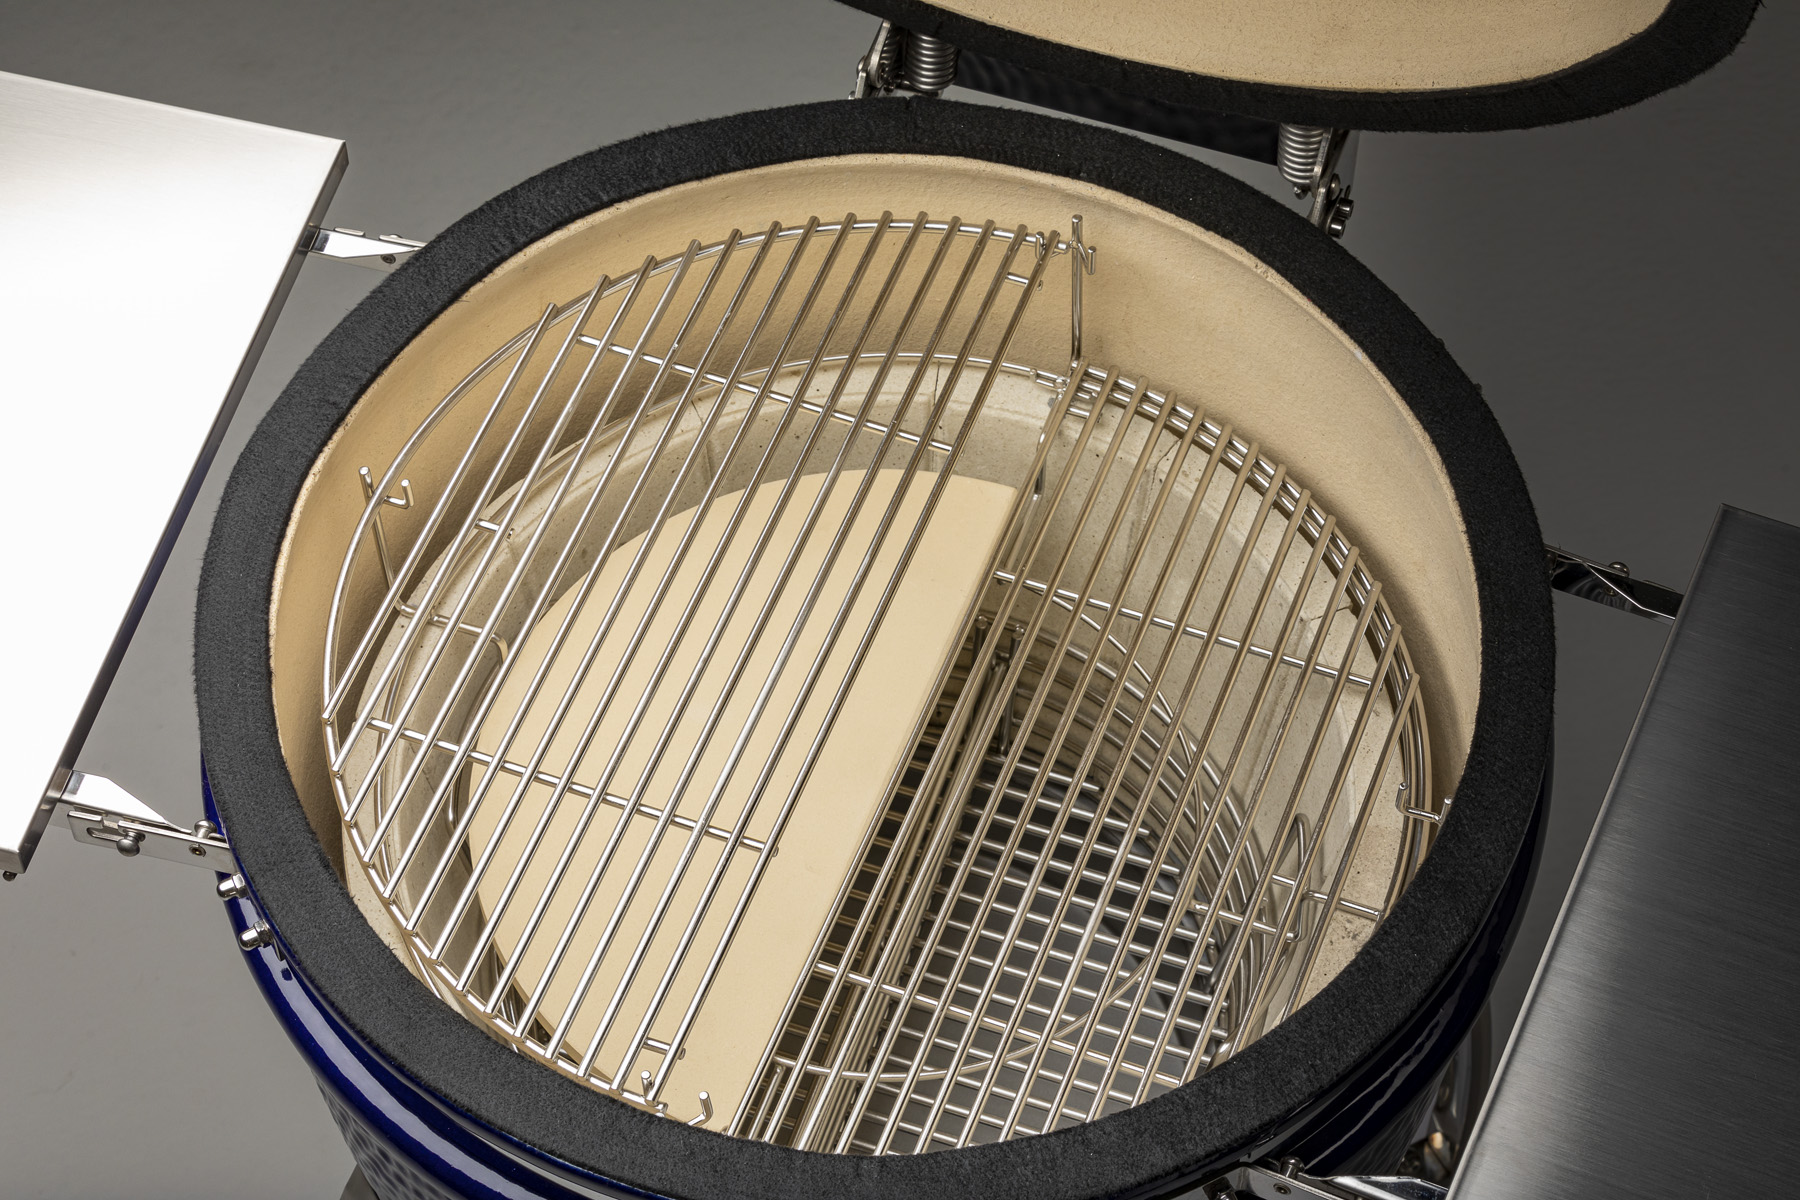 A Platinum Saffire grill is shown with the Multi-Grid, Two-Piece Ceramic Heat Deflector, Charcoal Basket and Ash Pan showing.